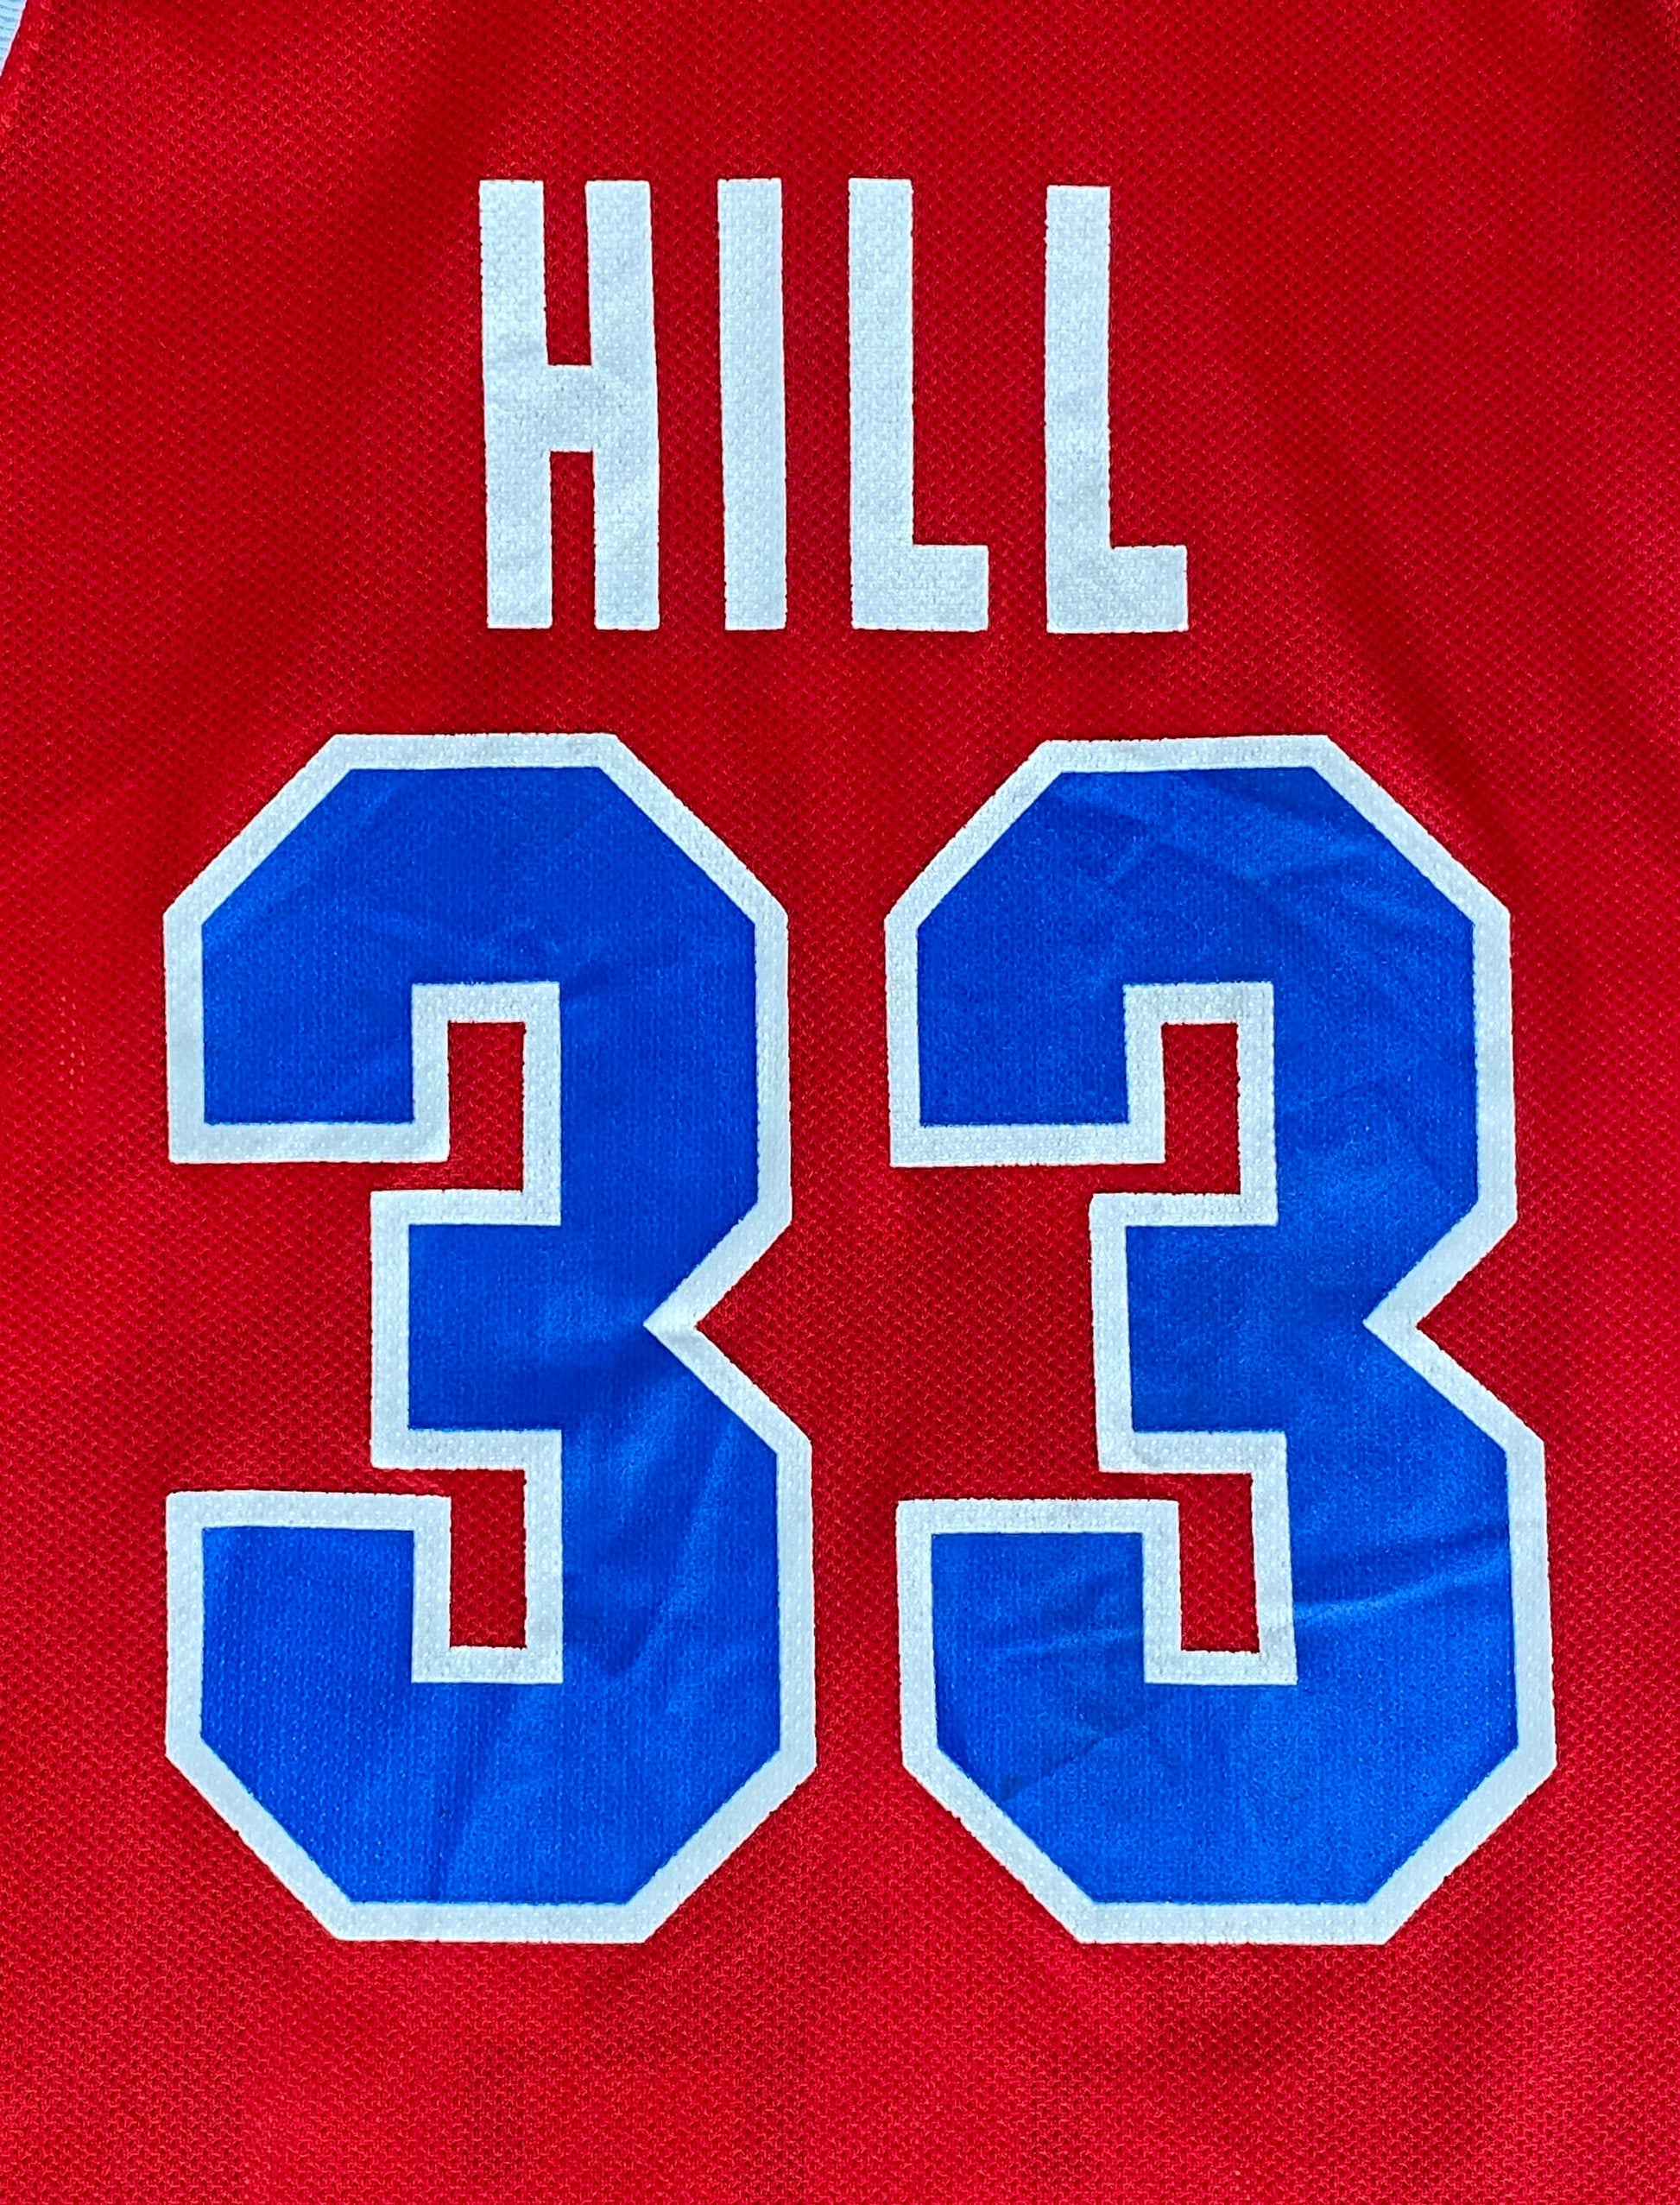 Piston 90s Vintage NBA Jersey #33 Hill - Size 36, Made in USA by Champion